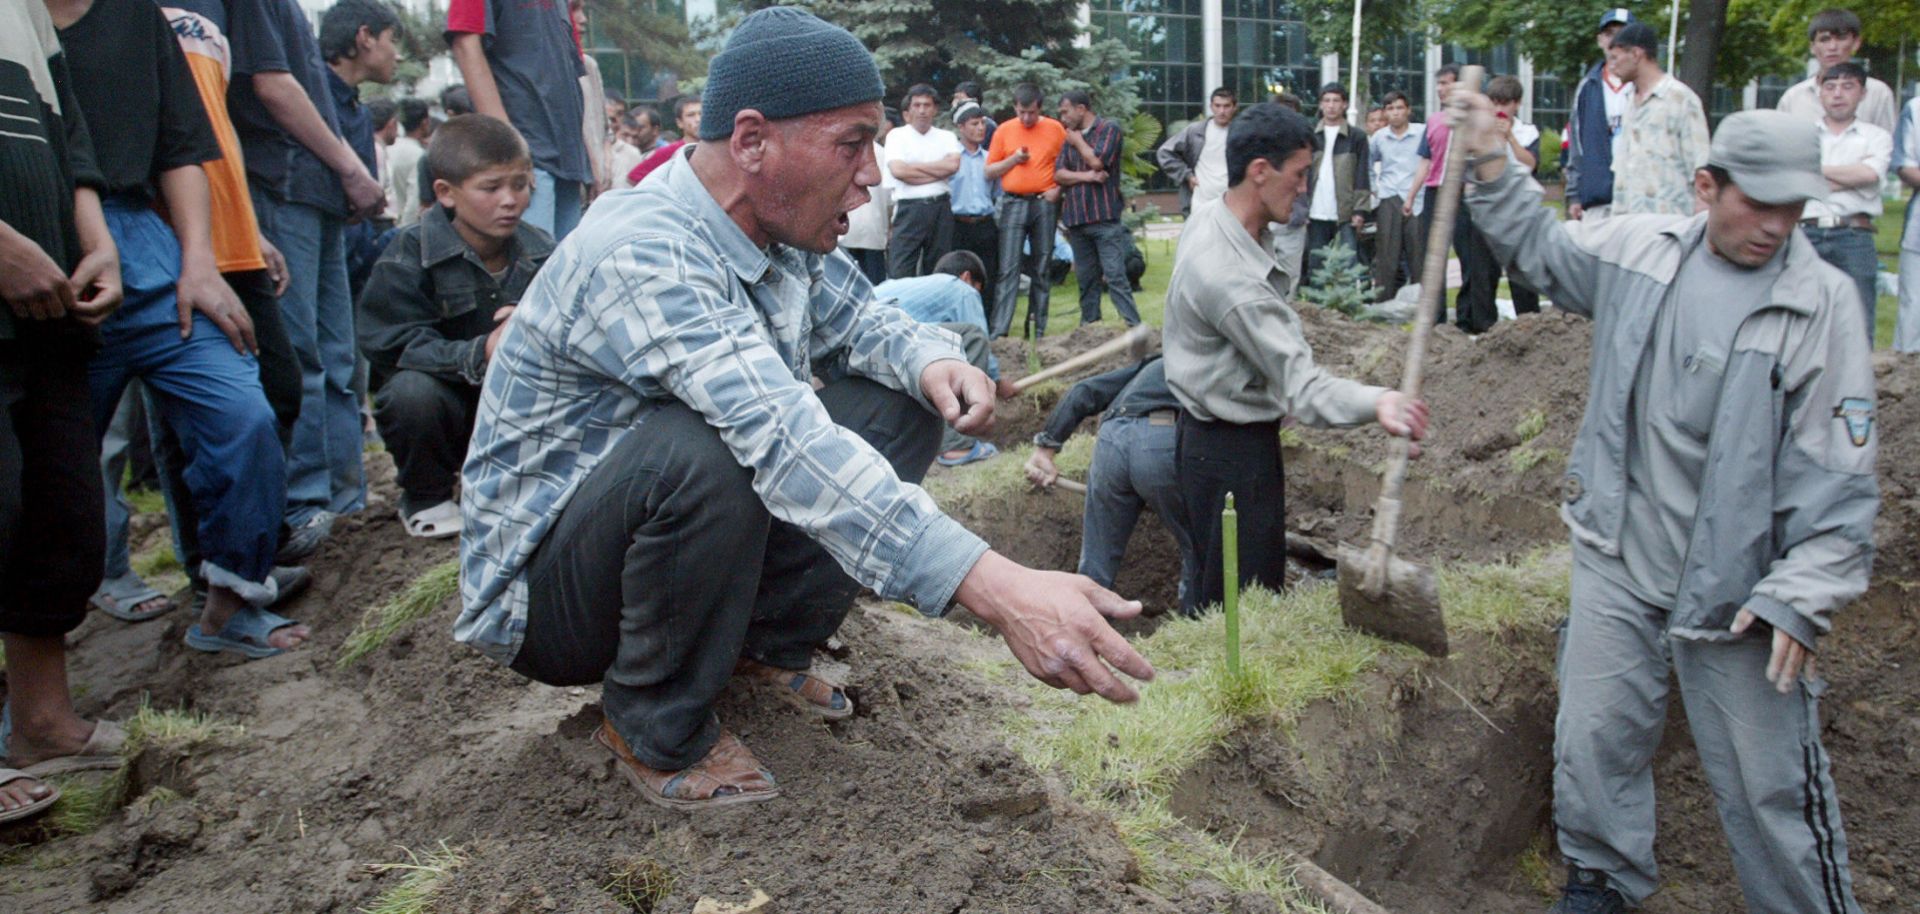 A man shouts as residents dig graves for the bodies of victims of clashes between government forces and local protesters prior to a funeral ceremony at the central square in the Uzbek town of Andijan, on May 14, 2005. Hundreds of people were reported killed after security forces opened fire on demonstrators.